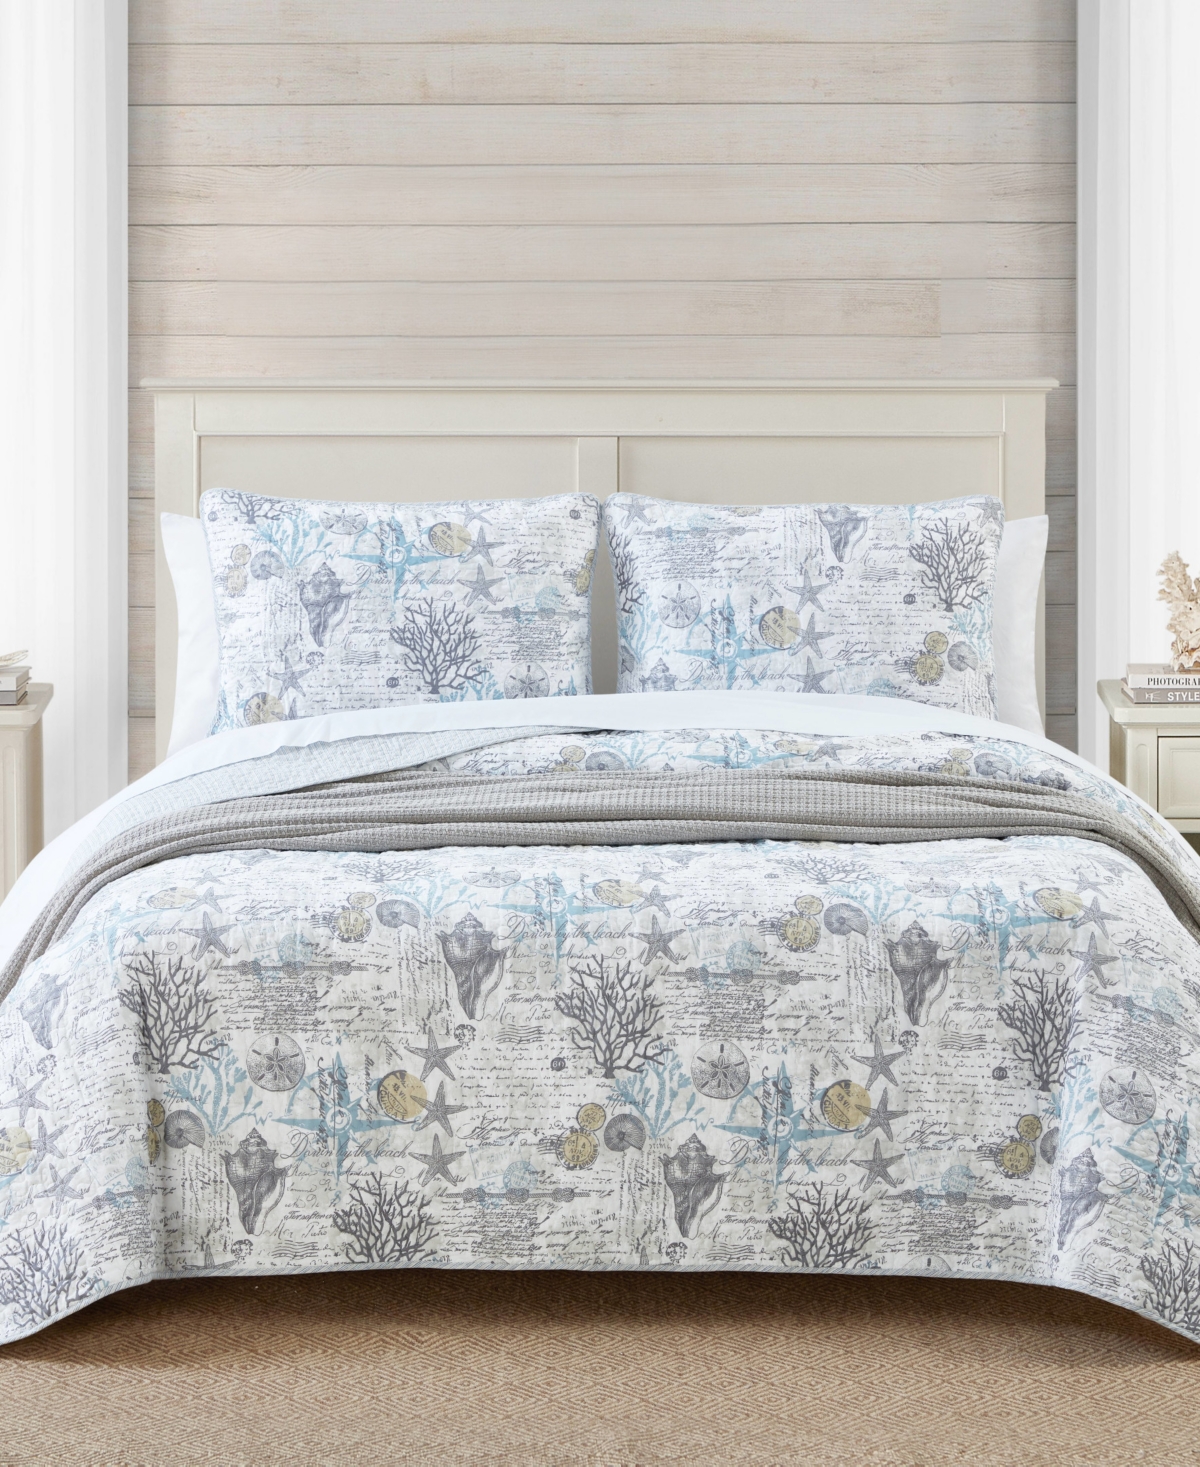 TOMMY BAHAMA HOME BEACH BLISS REVERSIBLE 3 PIECE QUILT SET, KING BEDDING